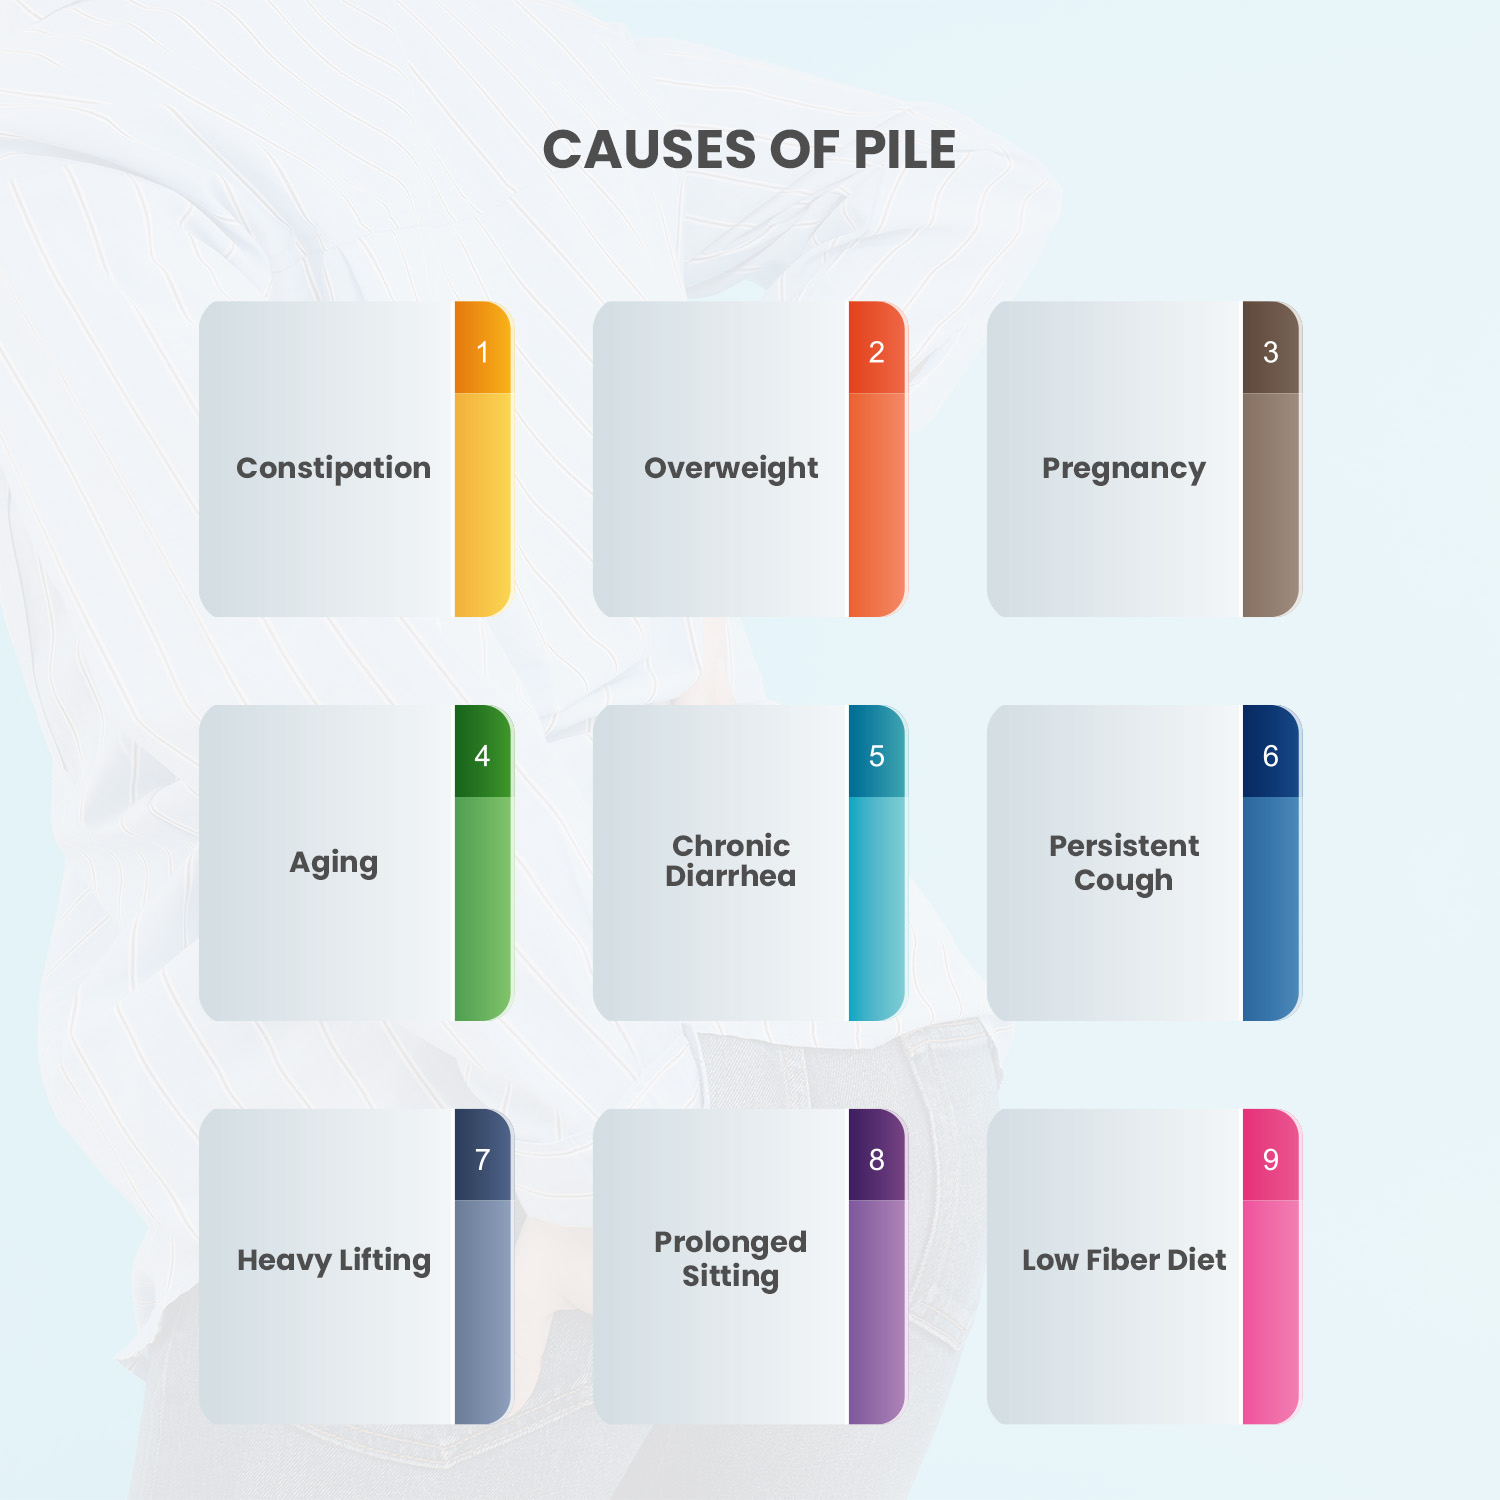 Causes of Piles